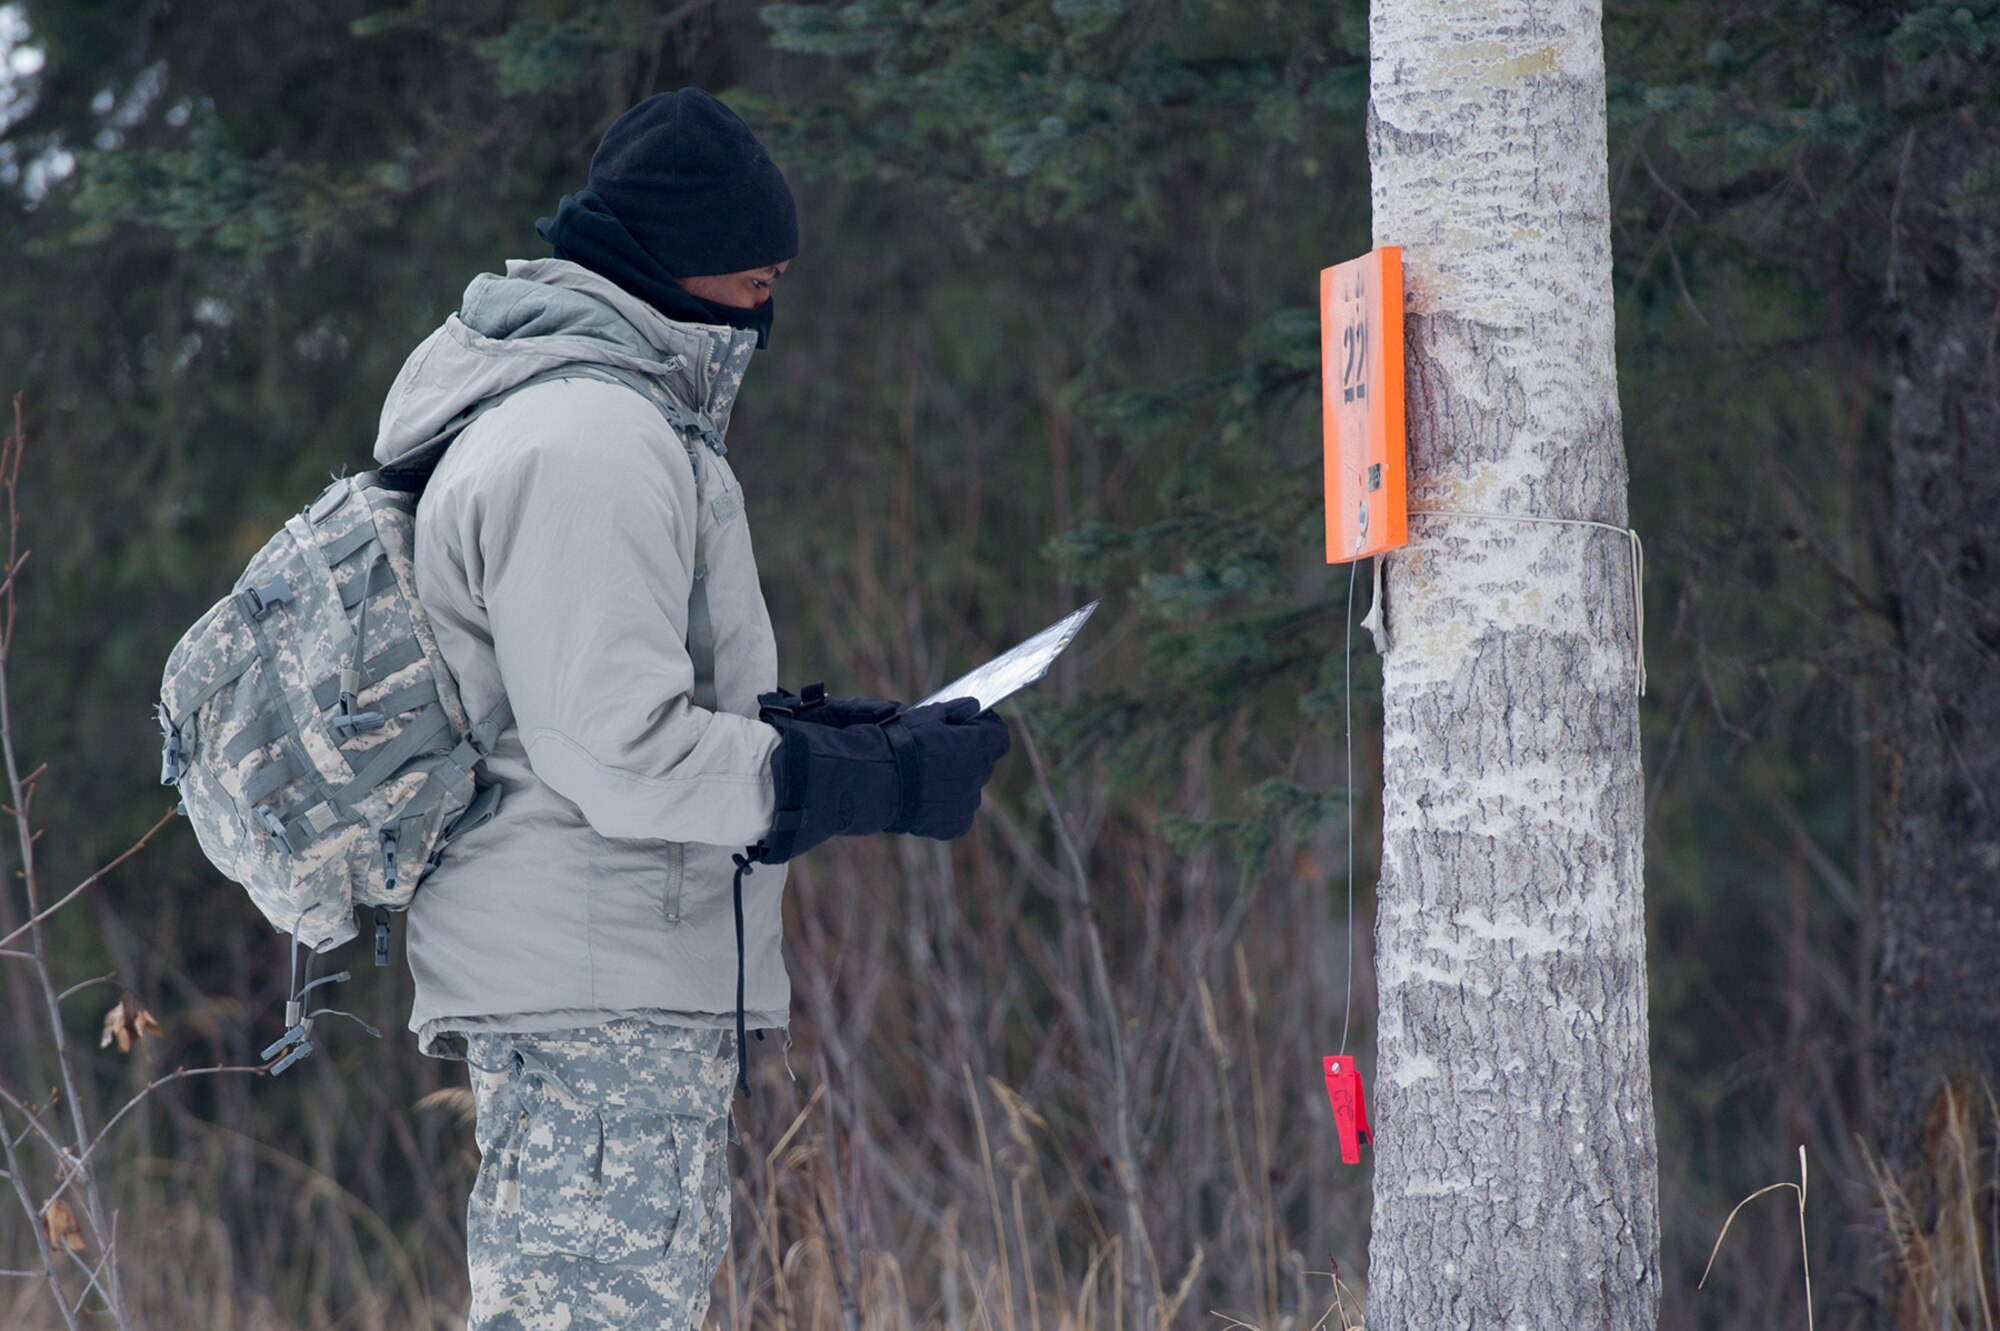 Spc. Nicholas Hayward, assigned to Hawk Company, 3rd Battalion, 509th Parachute Infantry Regiment, 4th Infantry Brigade Combat Team (Airborne), 25th Infantry Division, U.S. Army Alaska, plots his next point during a land navigation course on Joint Base Elmendorf-Richardson, Alaska, April 4, 2018.  Hayward and fellow Soldiers used their skills to plot courses using a lensatic compass, protractor, and a 1:25,000 scale map to navigate to, and locate points using provided grid coordinates within a predetermined time.